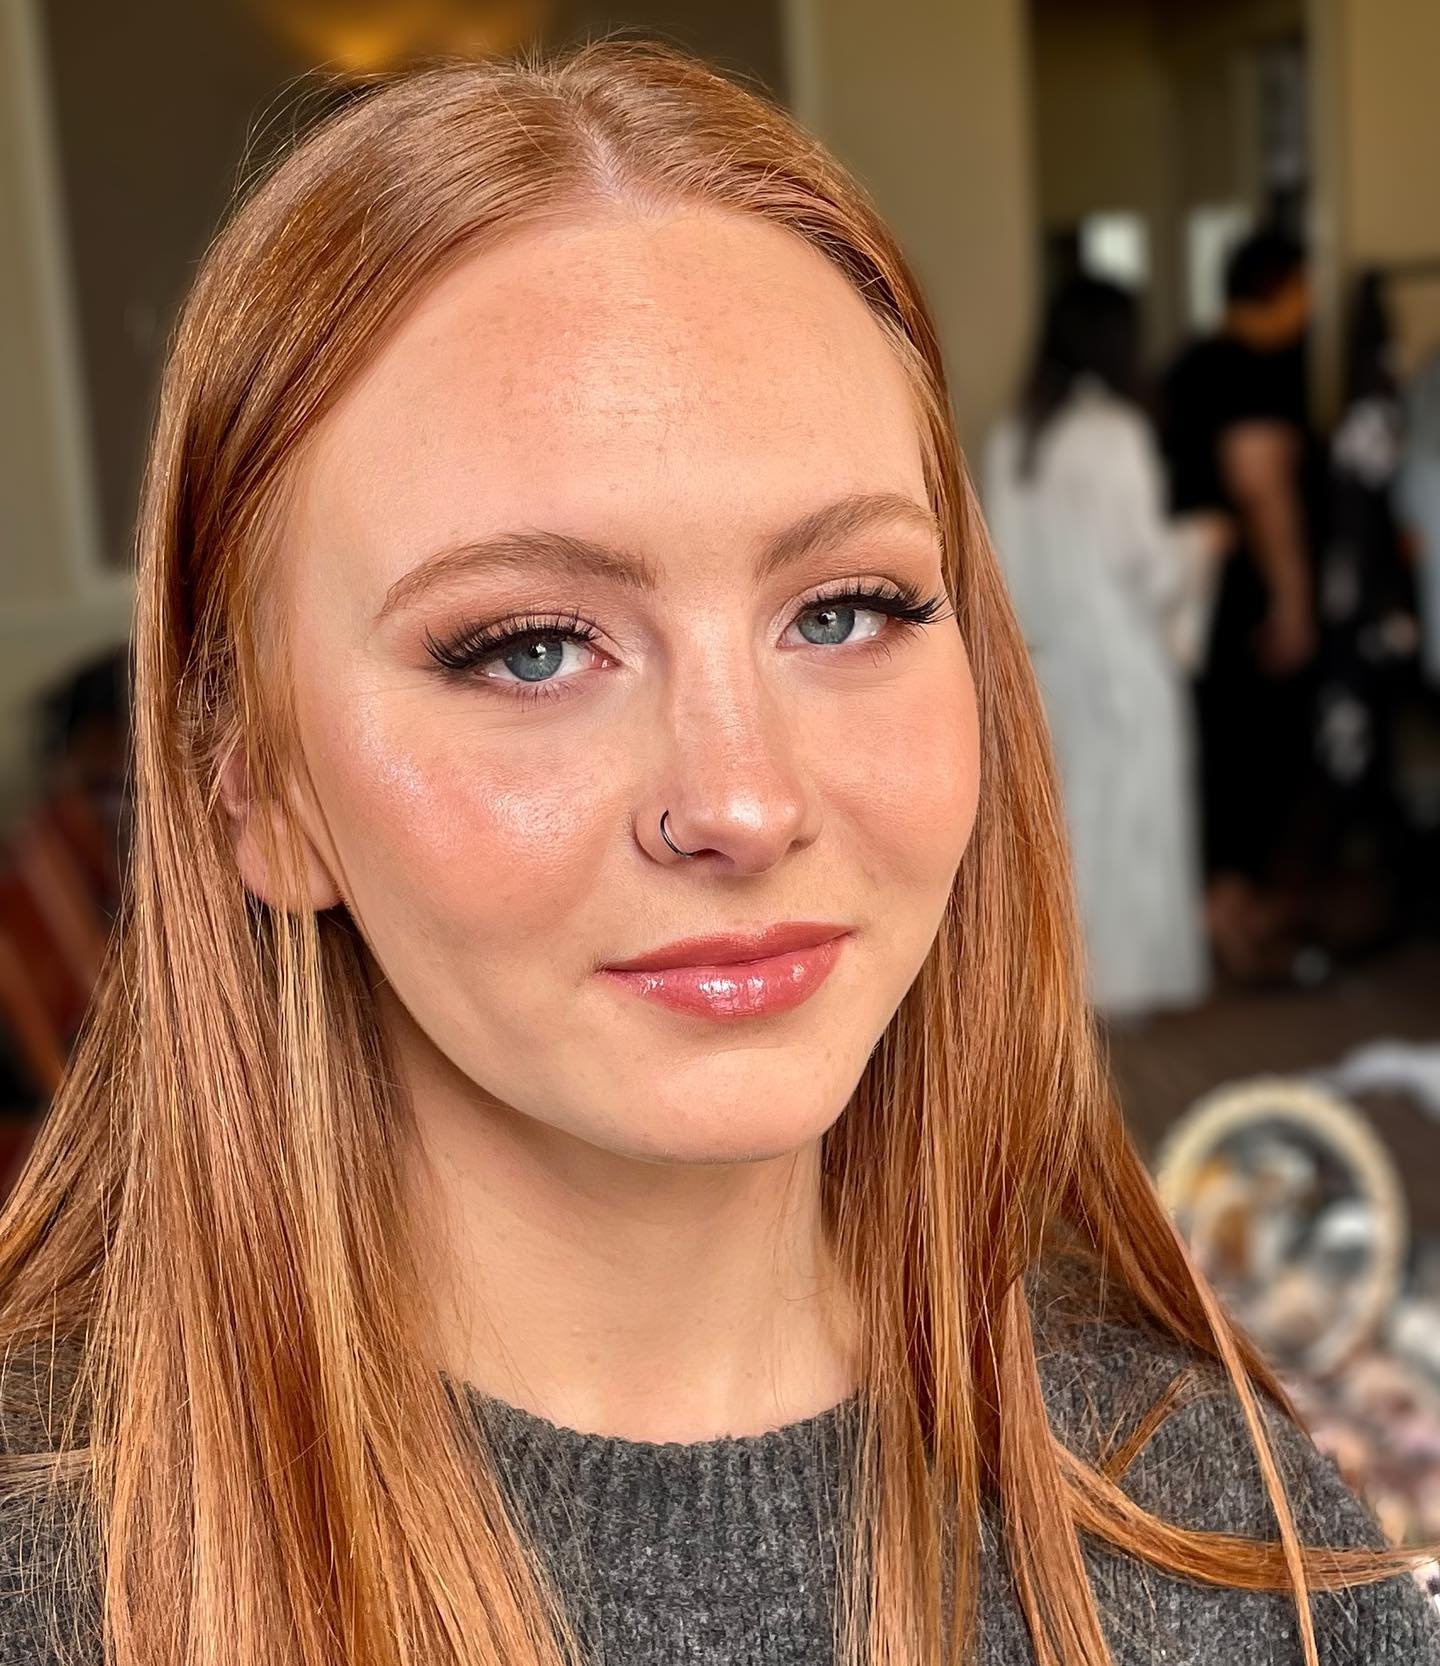 I love when a client wants her freckles to be on show! 

Aimee asked for a light coverage with lots of glow, so I reached for Nars light reflecting foundation and added a touch of Tatcha Water Cream for that perfect sheer finish. 

For her gorgeous h